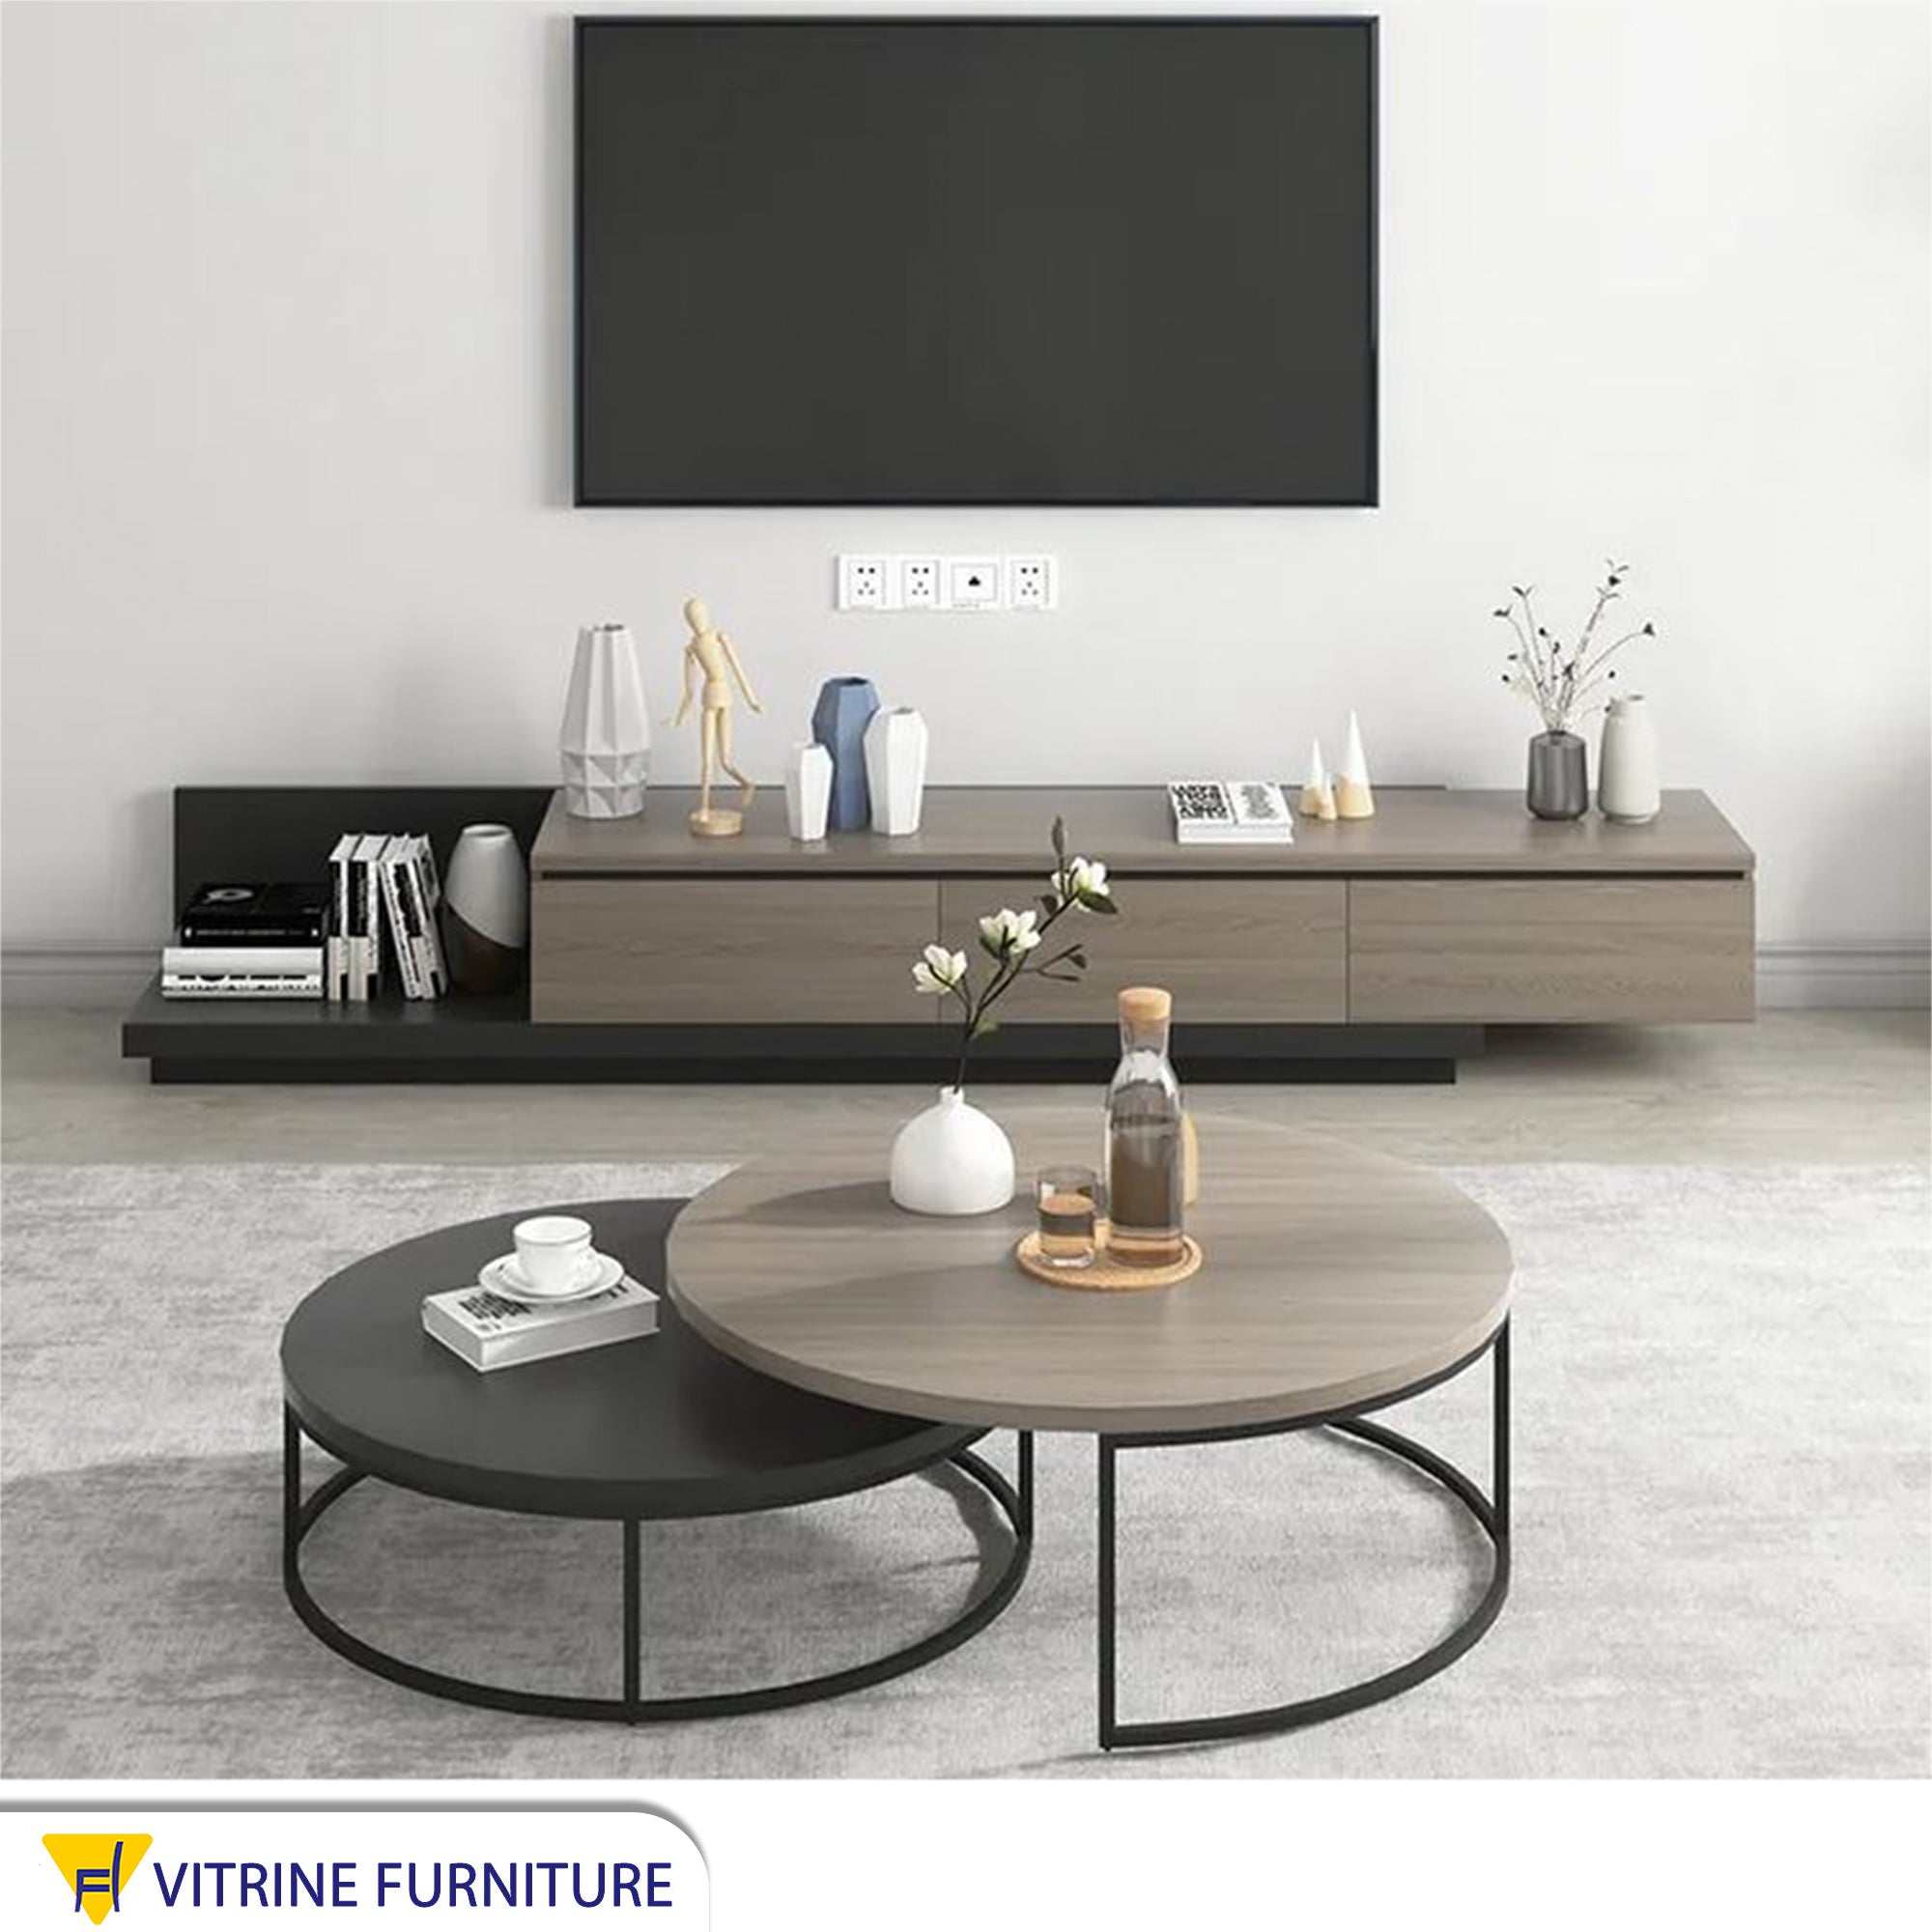 TV unit and circular center tables